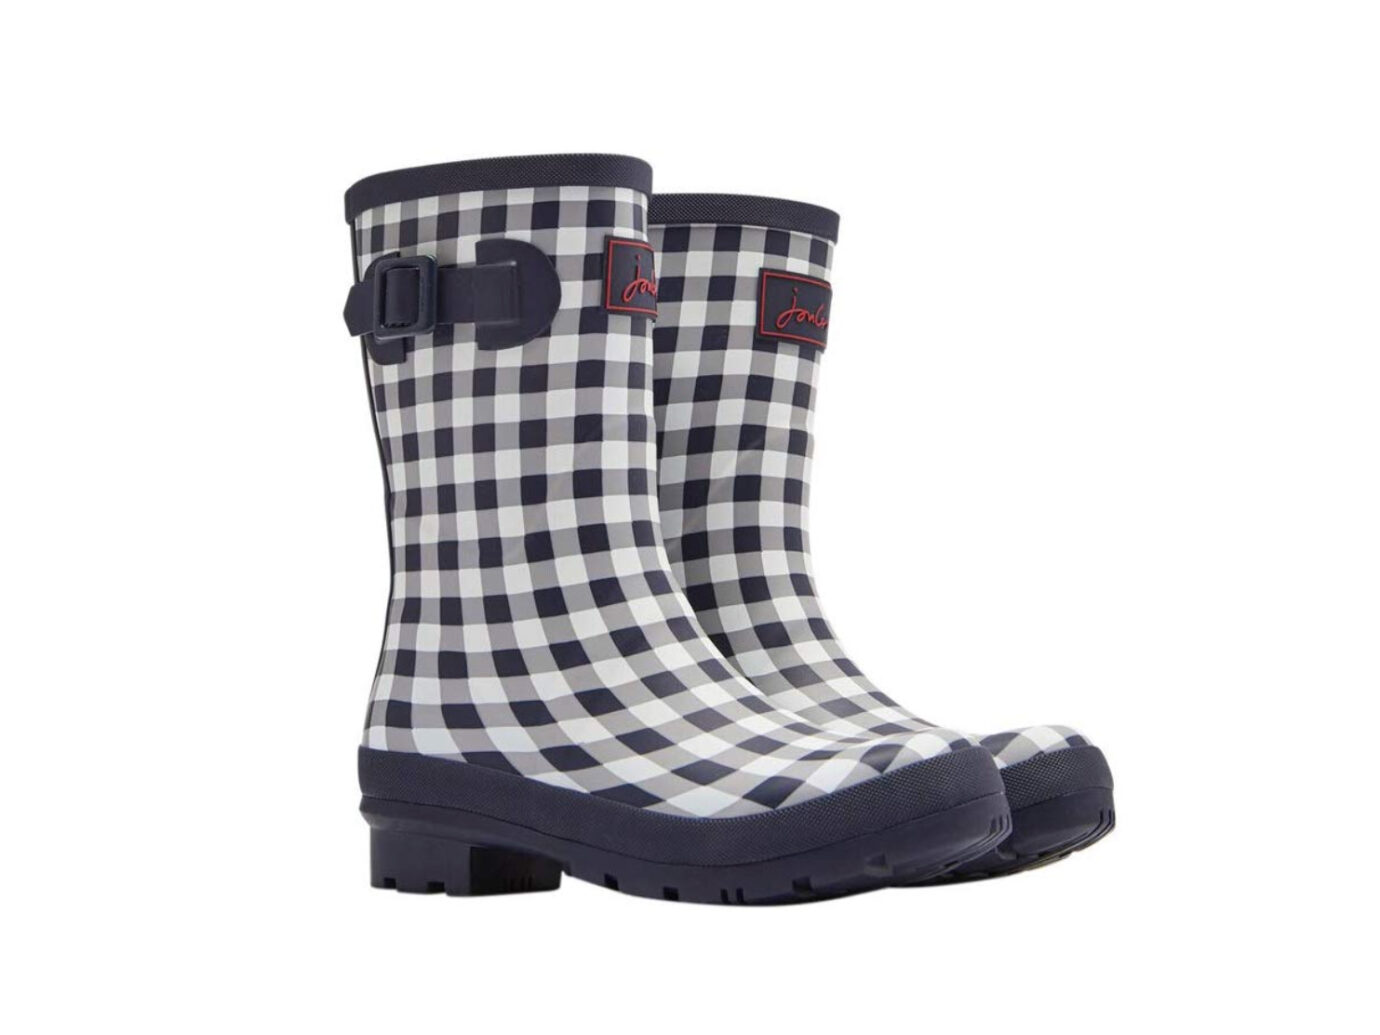 Joules Molly Mid-Height Printed Rain Boot in gingham